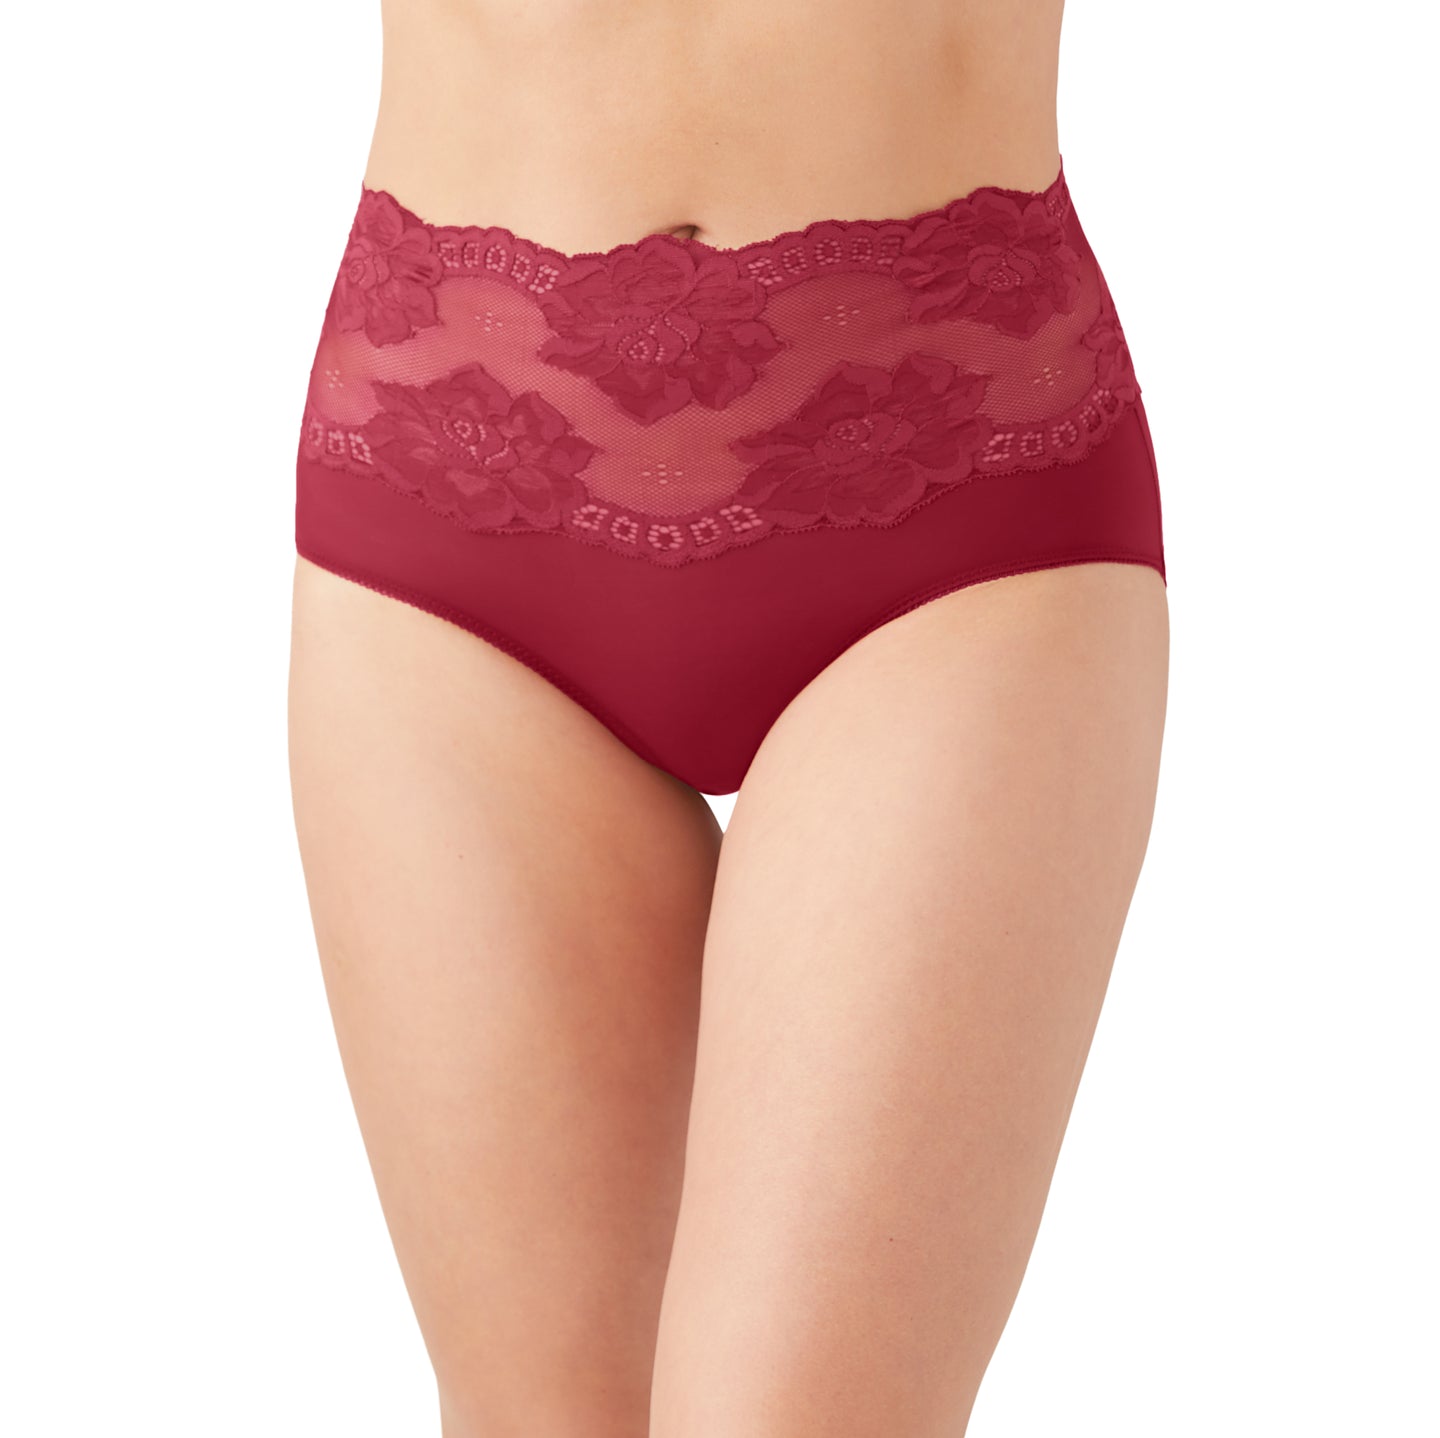 Light and lacy Brief